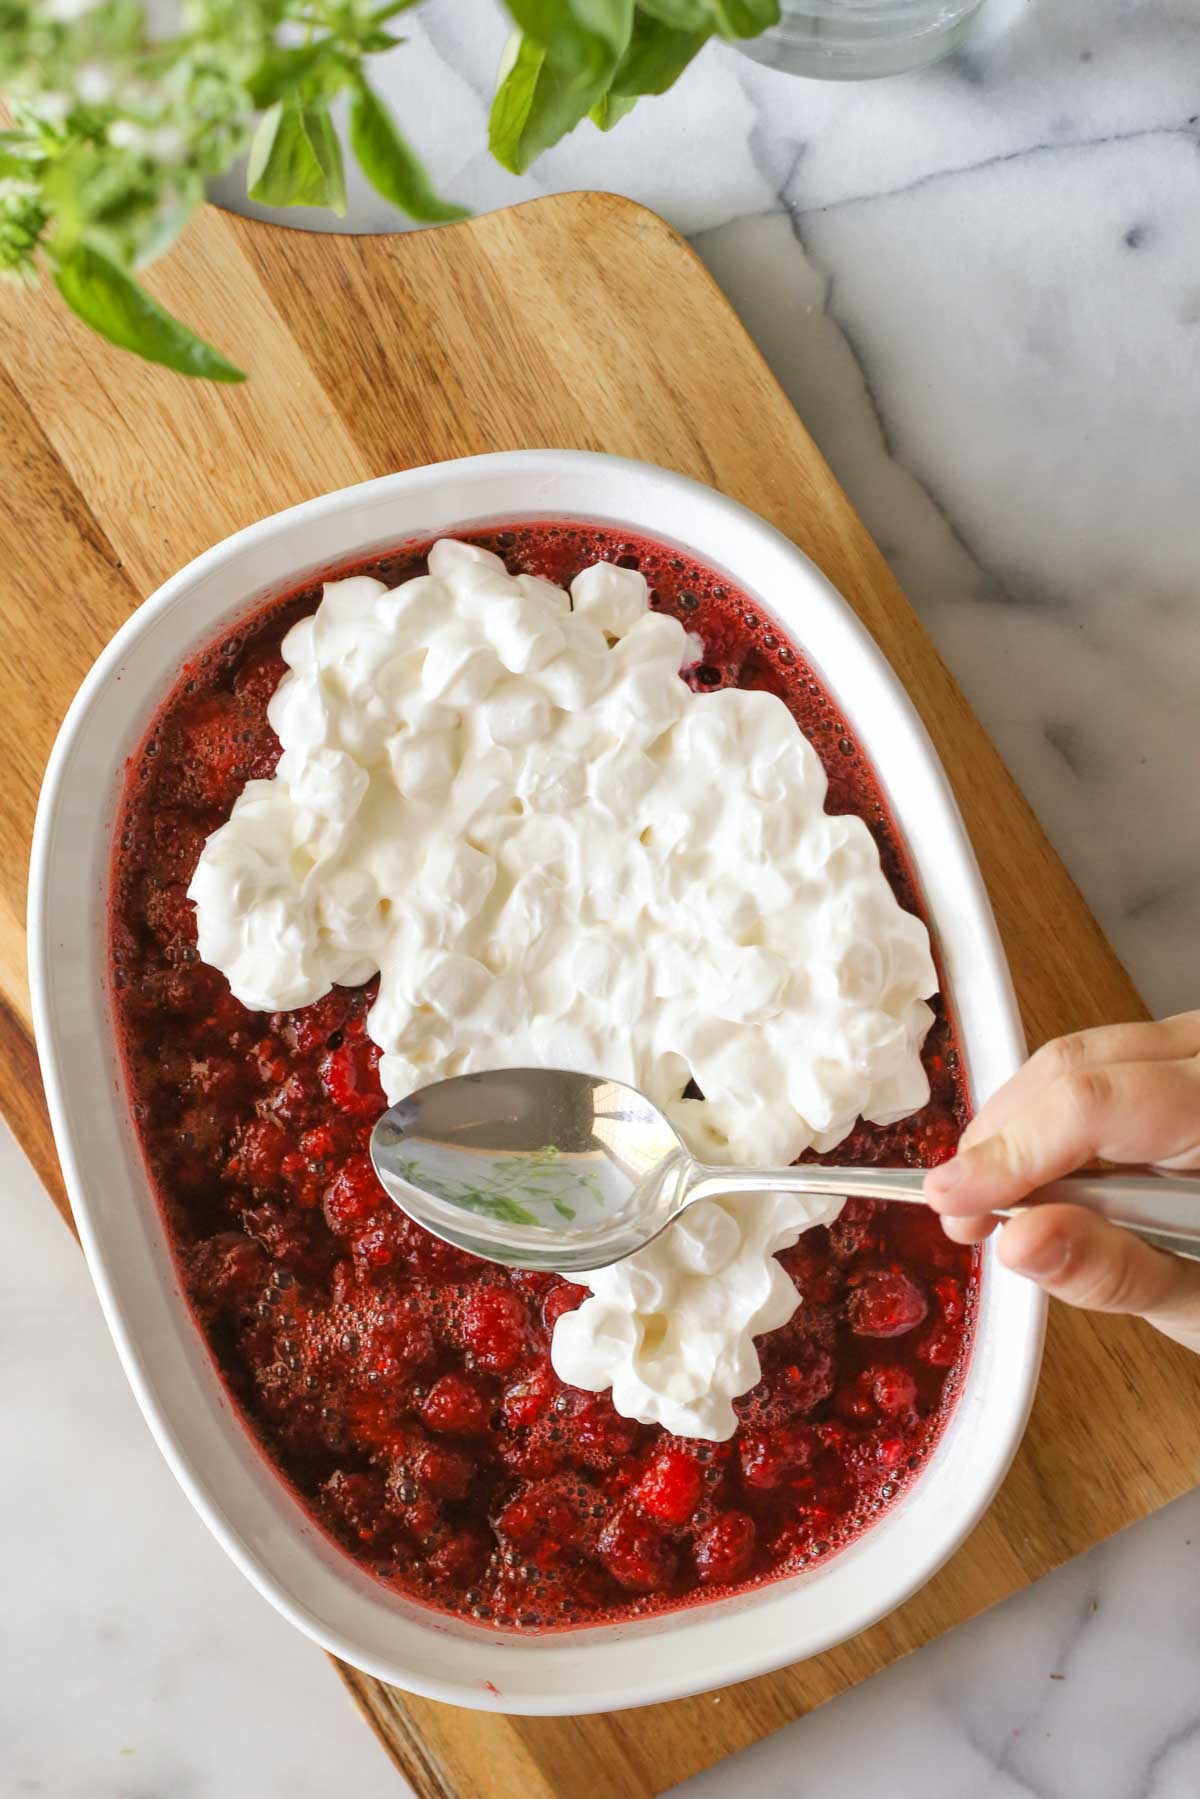 Overhead shot of Raspberry Jello Salad in a baking dish sitting on a wood cutting board, with the sour cream marshmallow mixture being spread on top.  